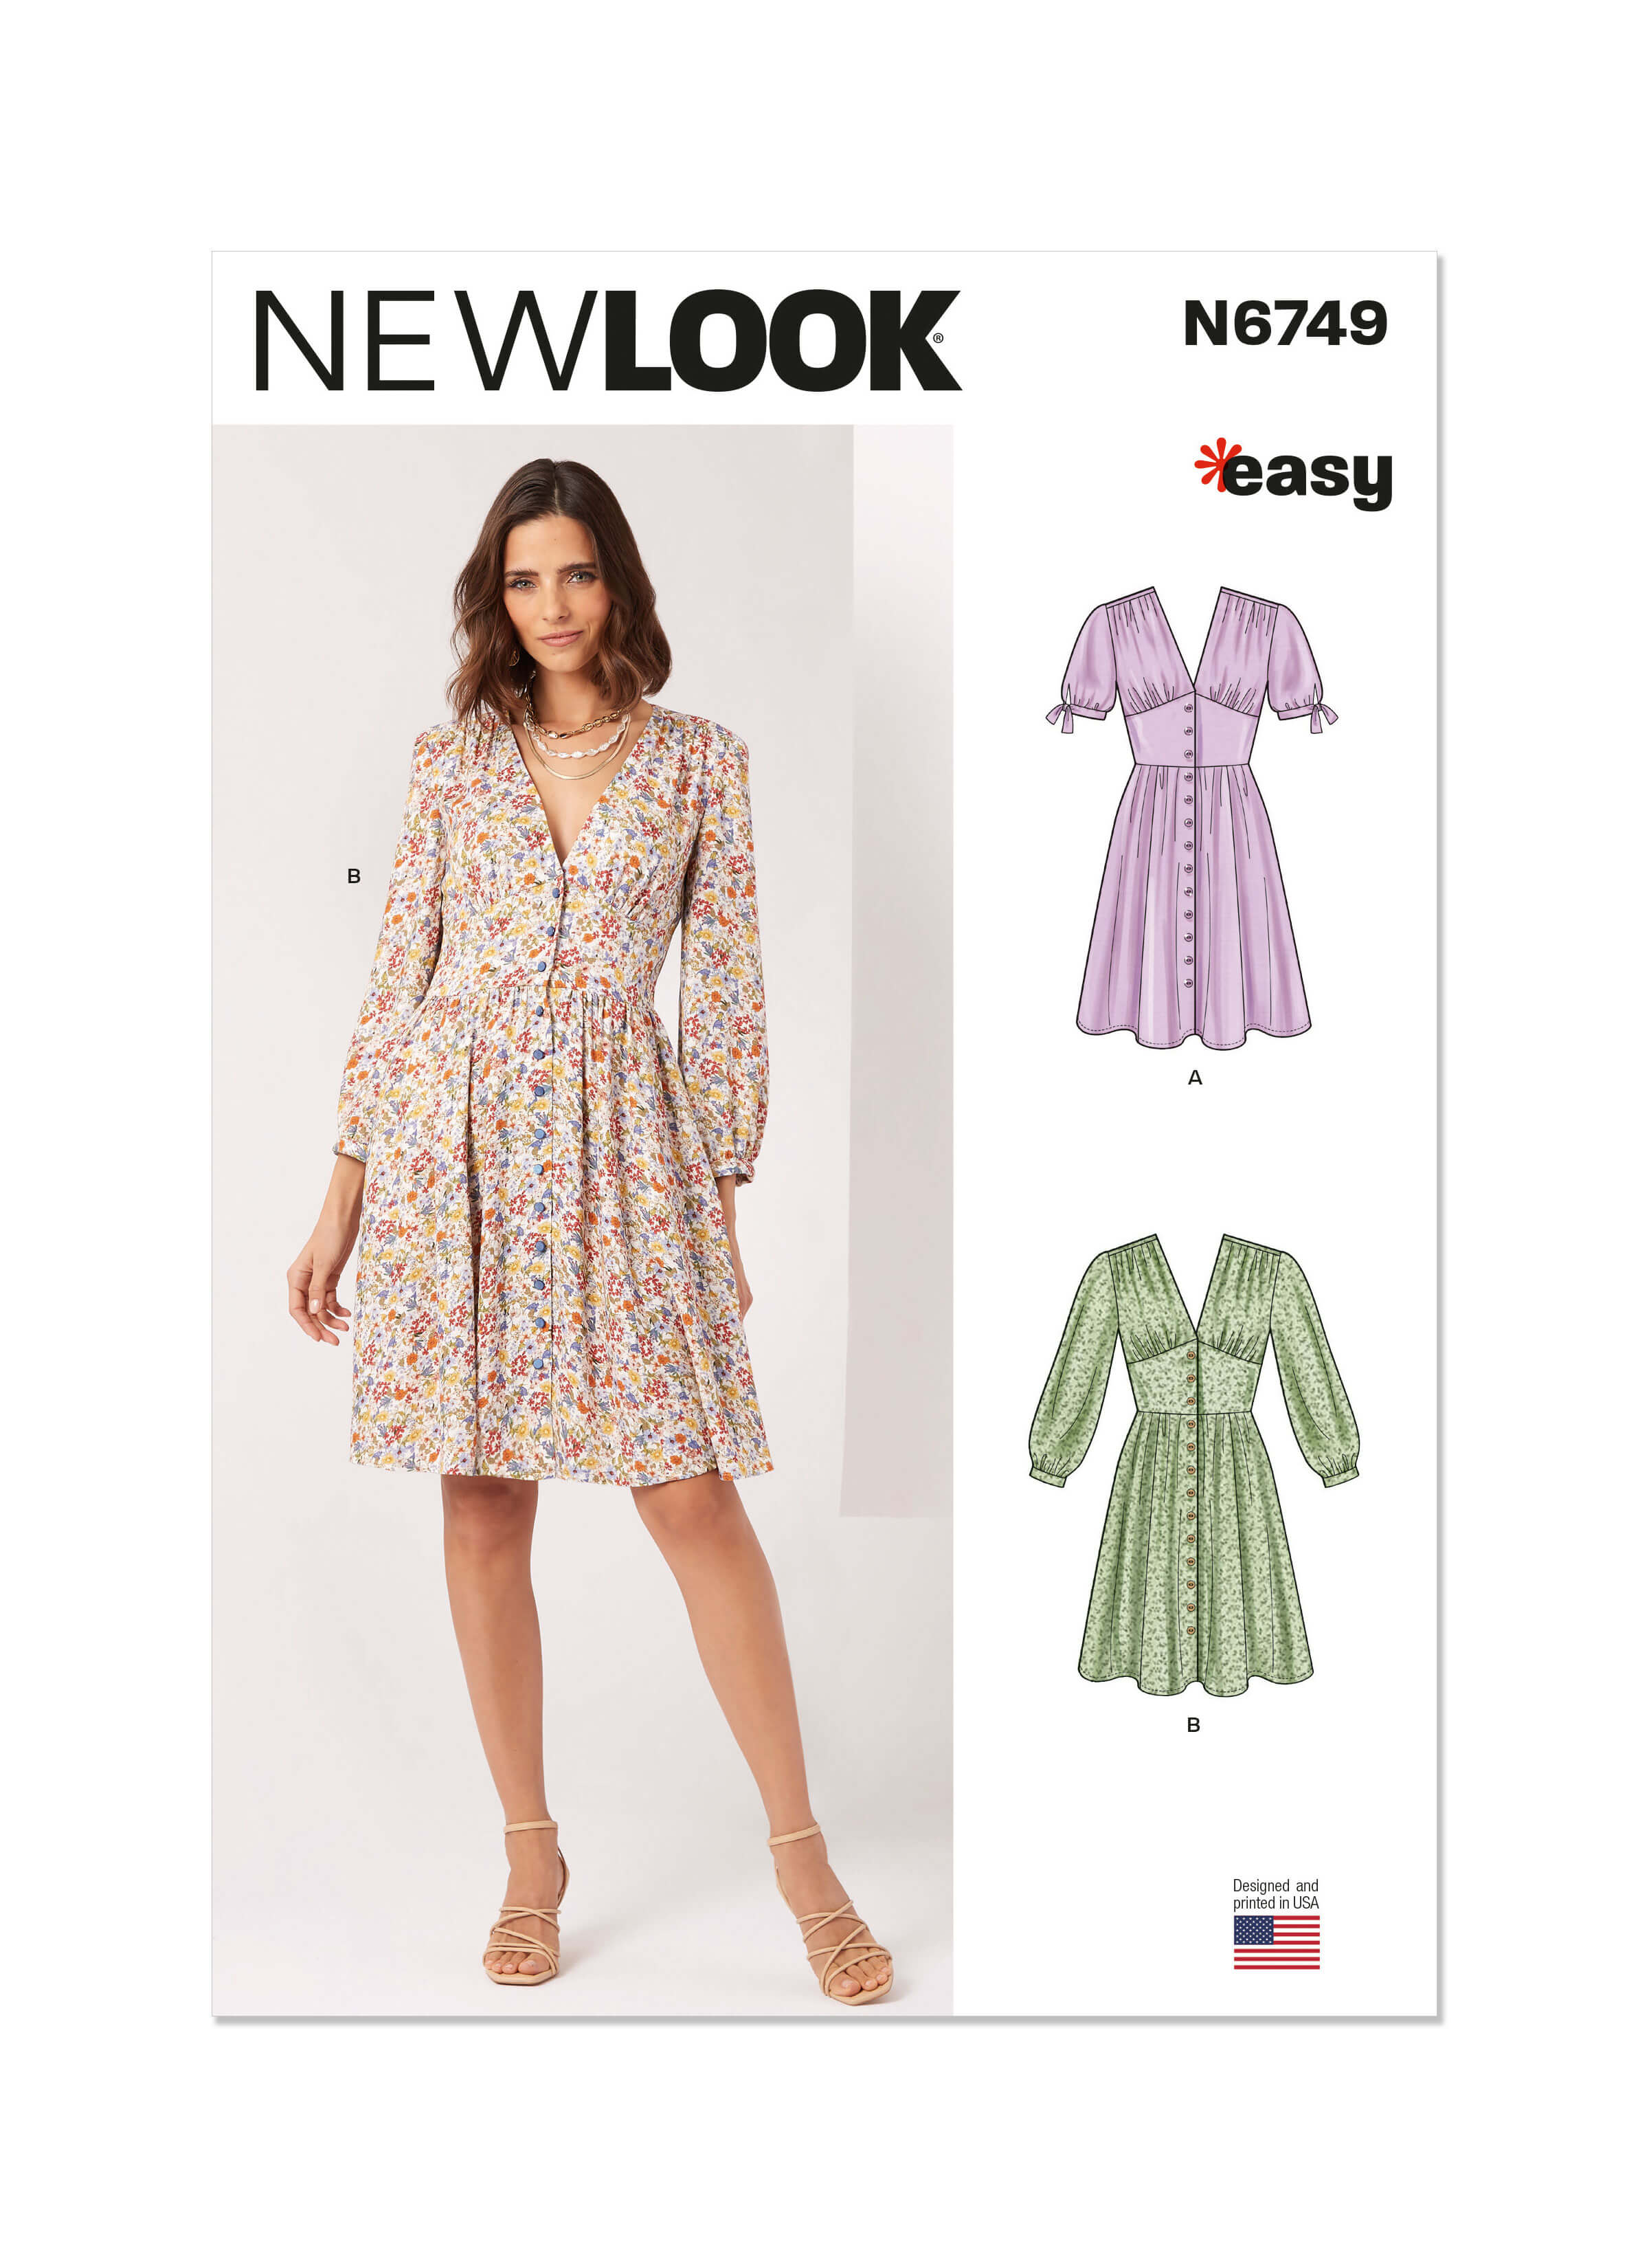 New Look Sewing Pattern Misses' Dress With Sleeve Variations